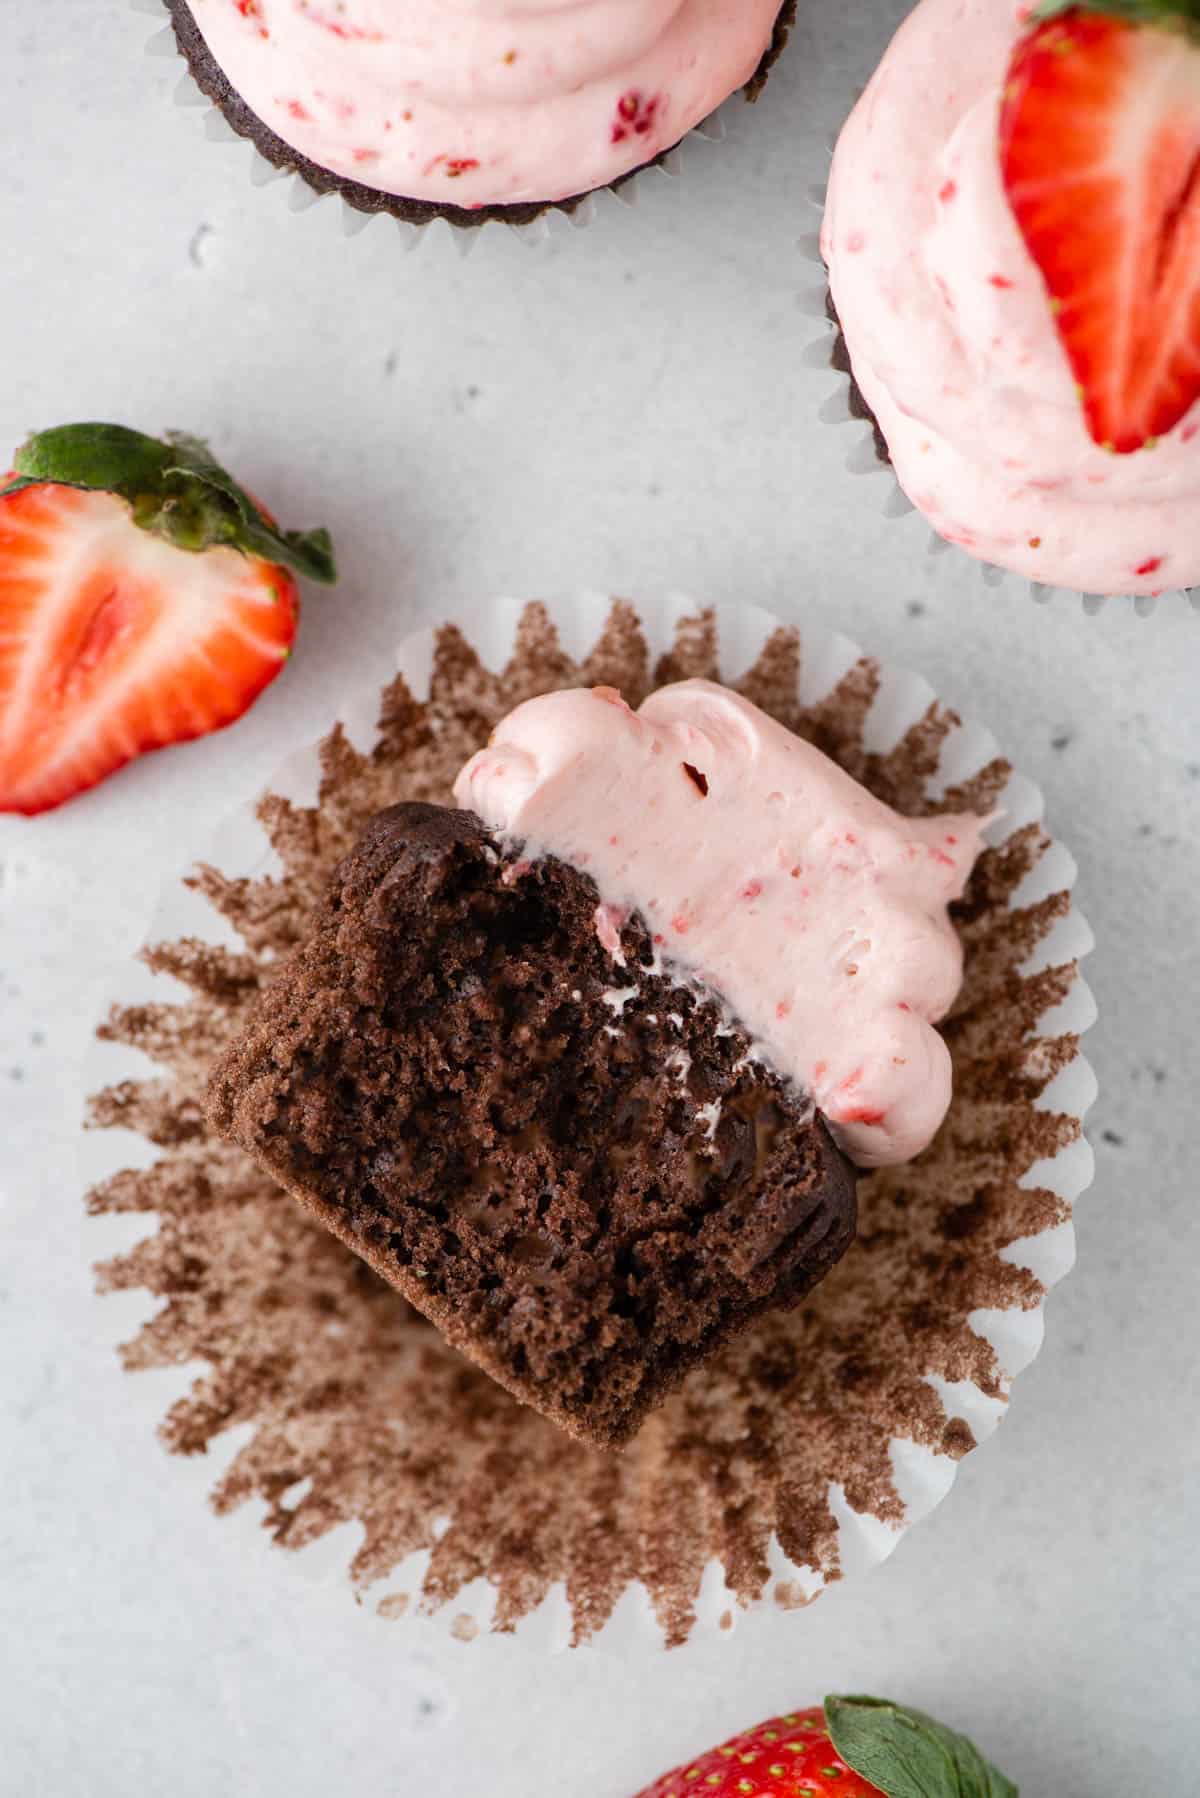 partially eaten chocolate cupcake with laying on it's side on a paper muffin cup with fresh strawberries and more cupcakes arranged around it